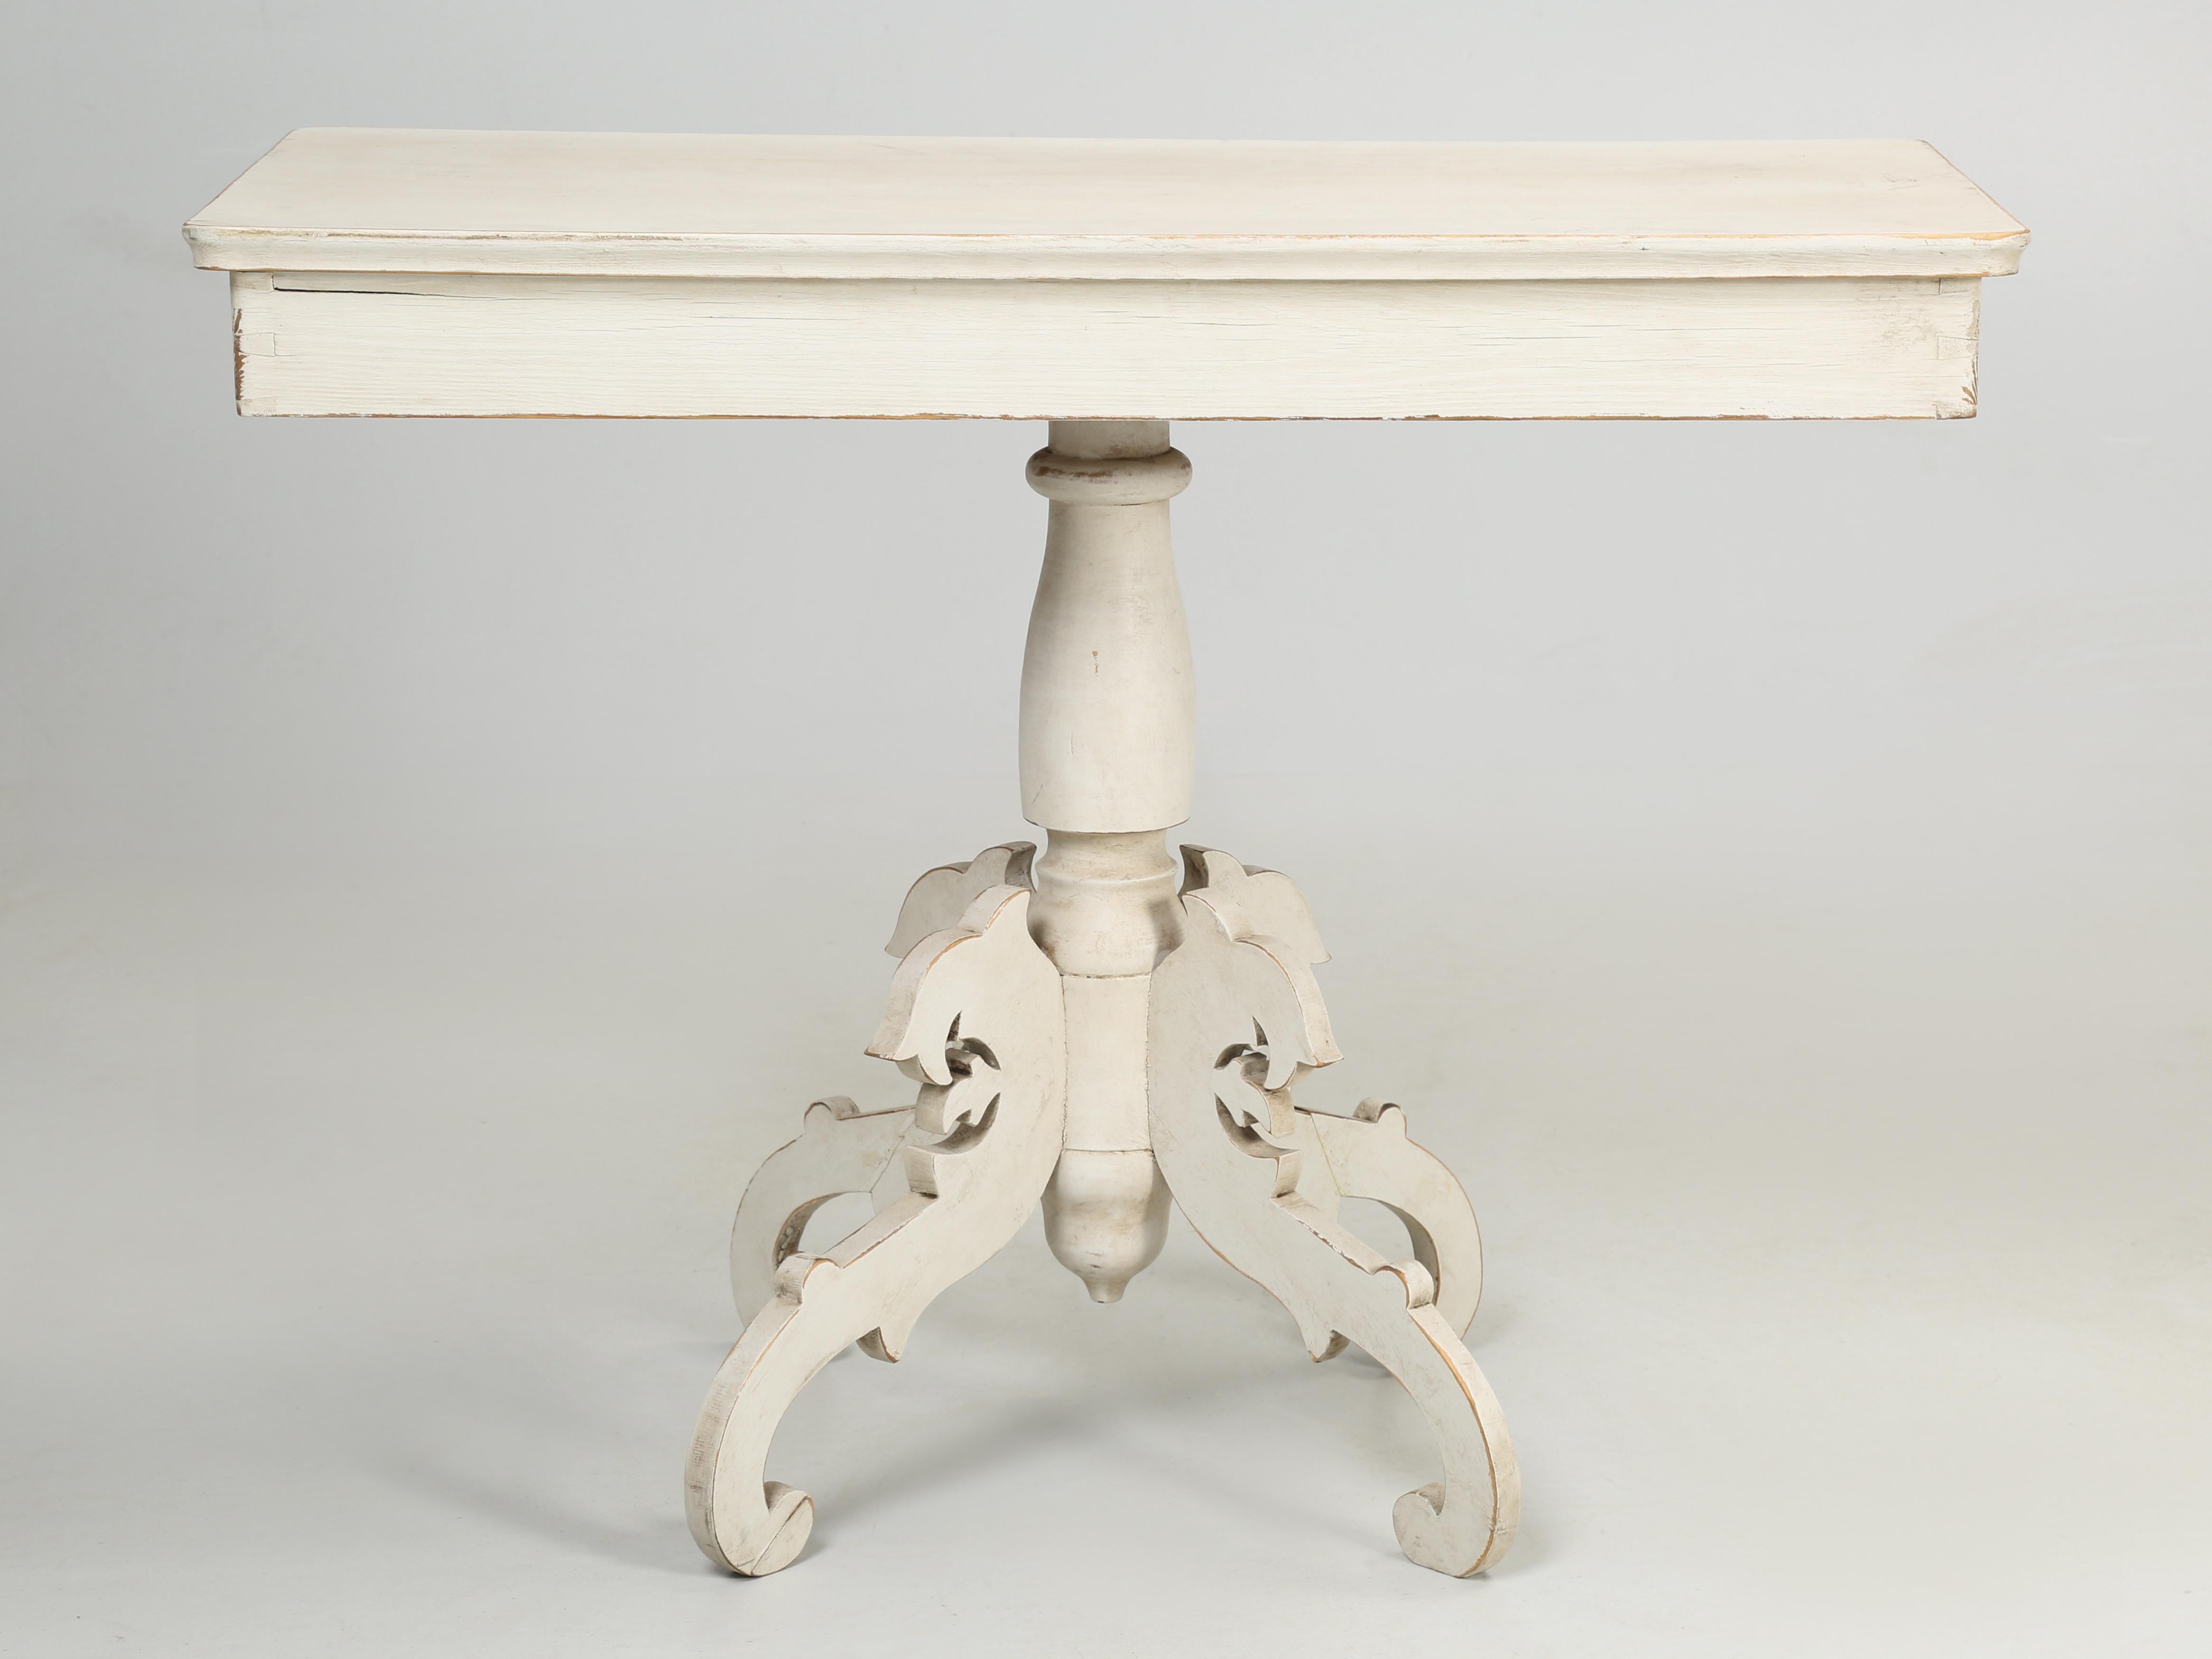 Small pedestal table that we believe came from Sweden. The paint is certainly much newer than the table, which appears to be constructed in the first half of the last century, while the paint was in the second half. This small Swedish table has a